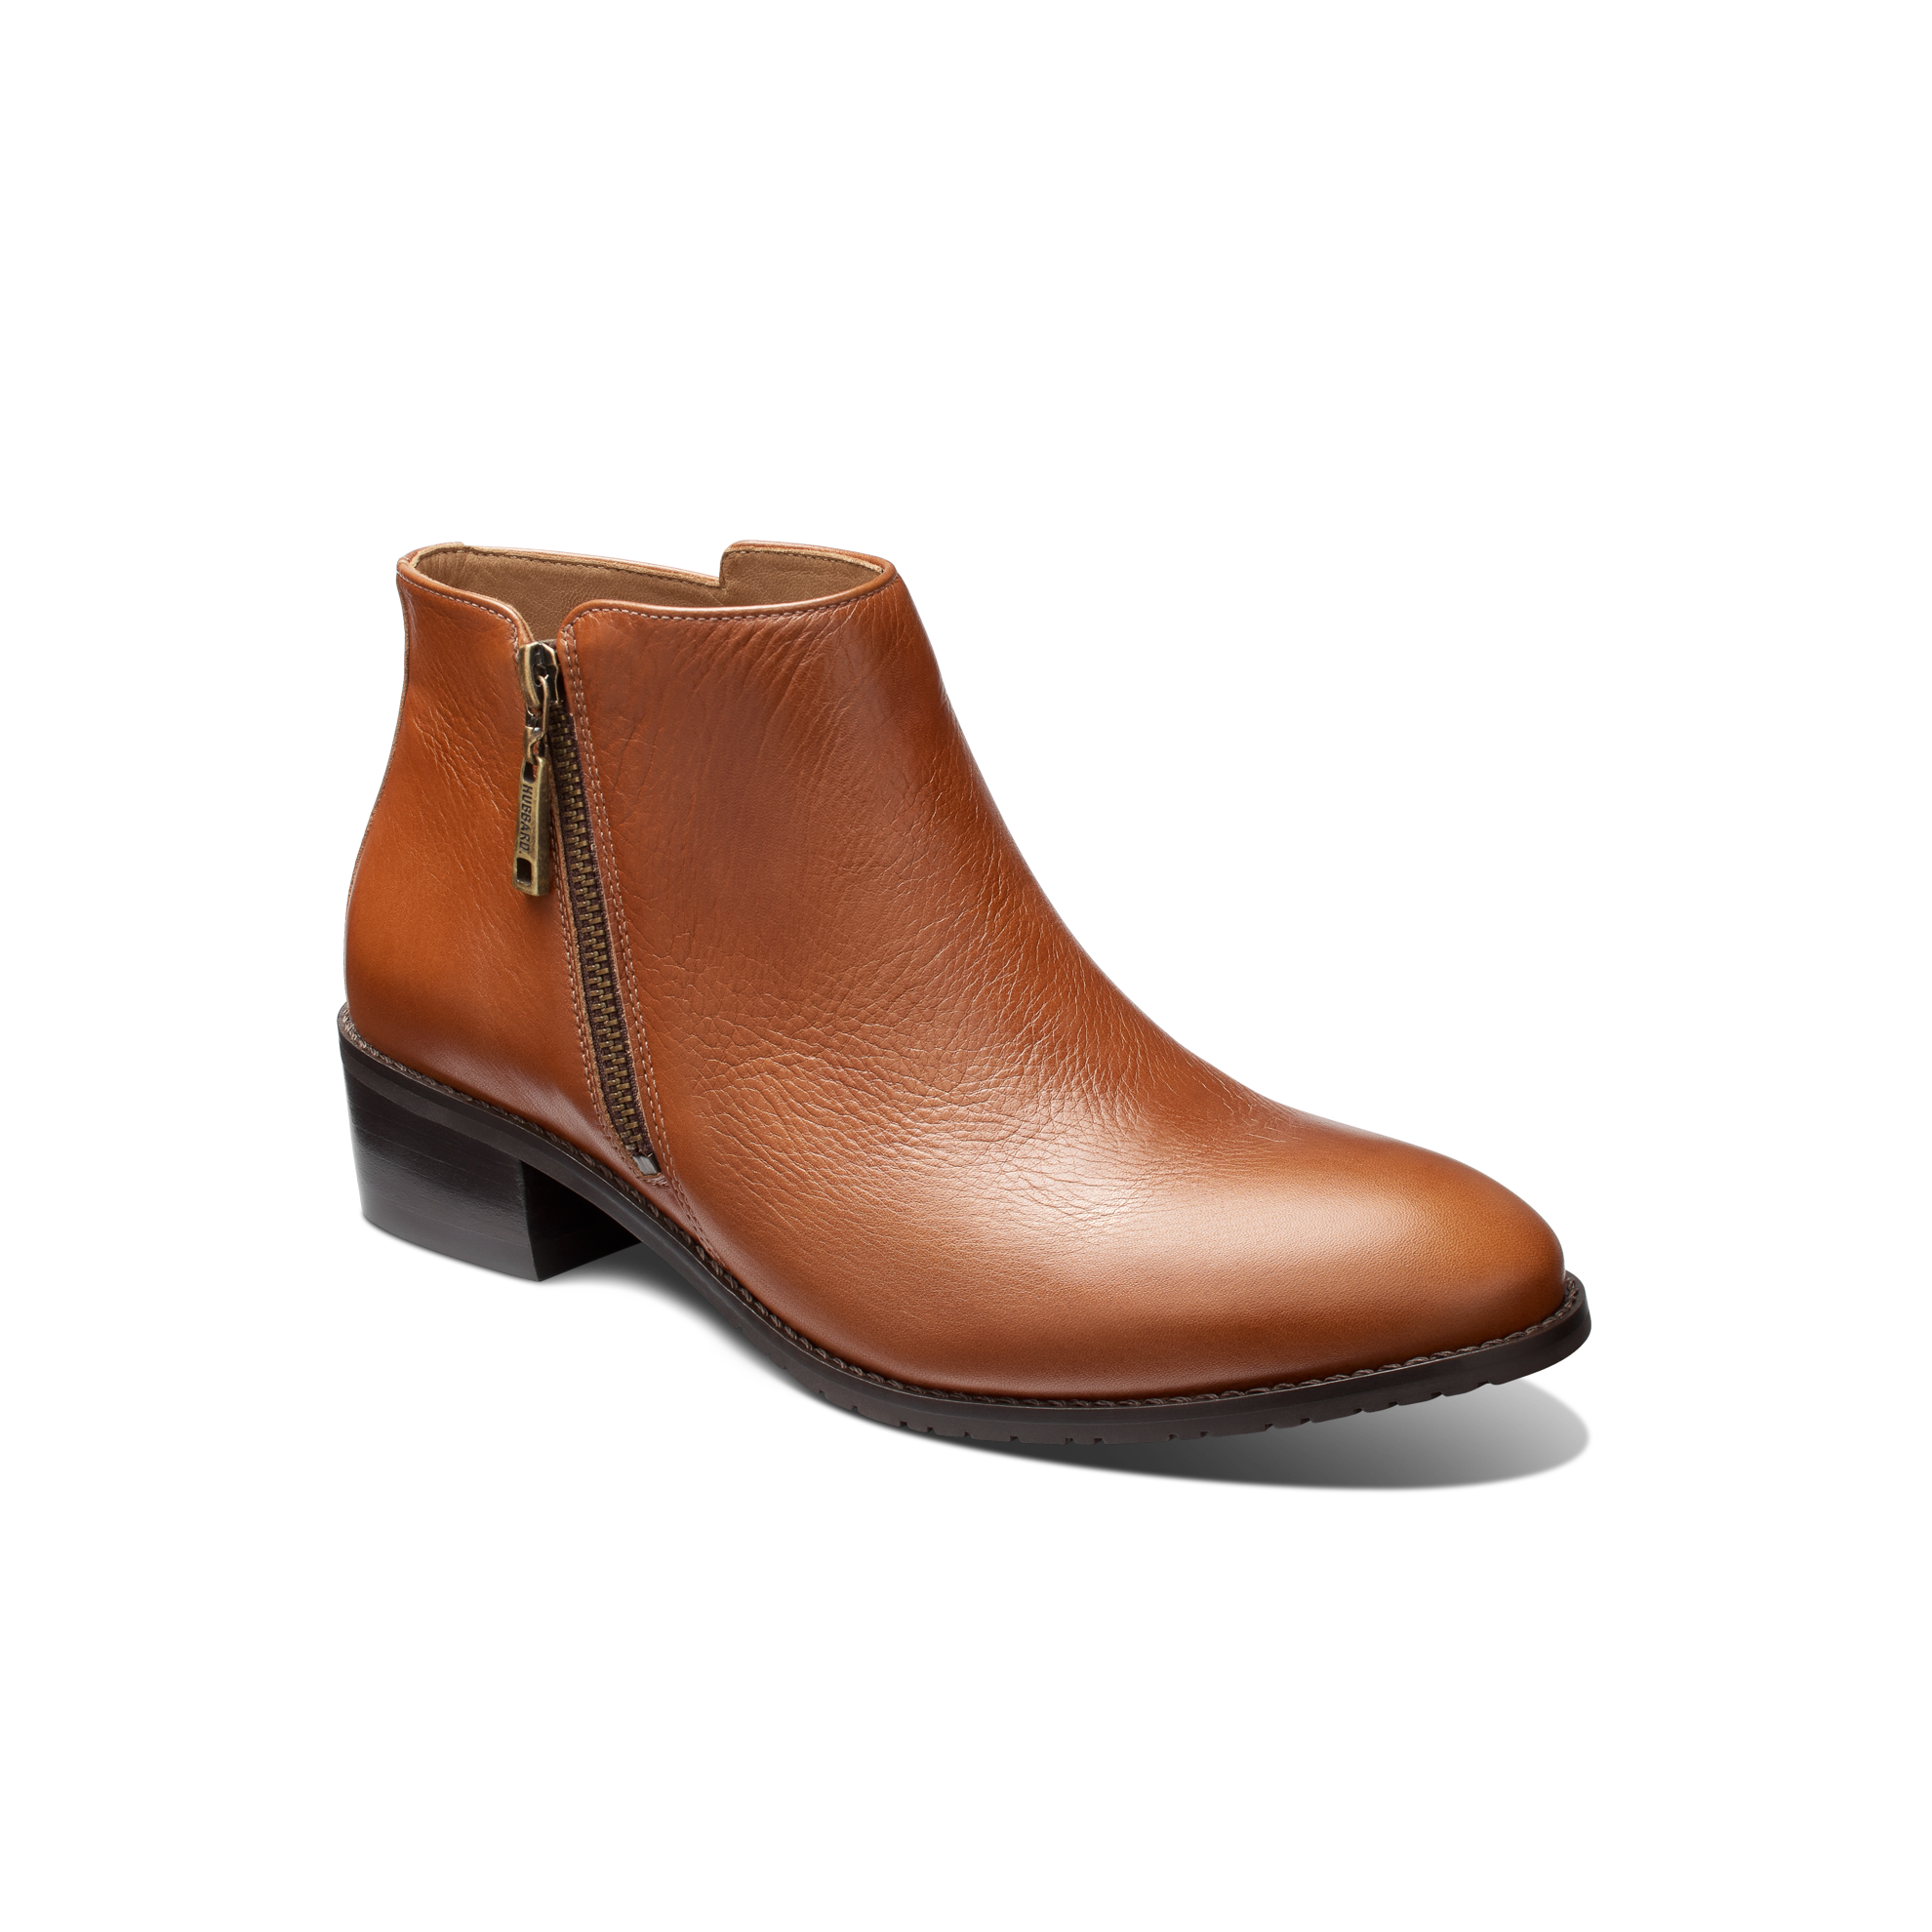 Krage Gendanne Afstem Valencia | Women's Leather Ankle Boot | Whiskey Tan